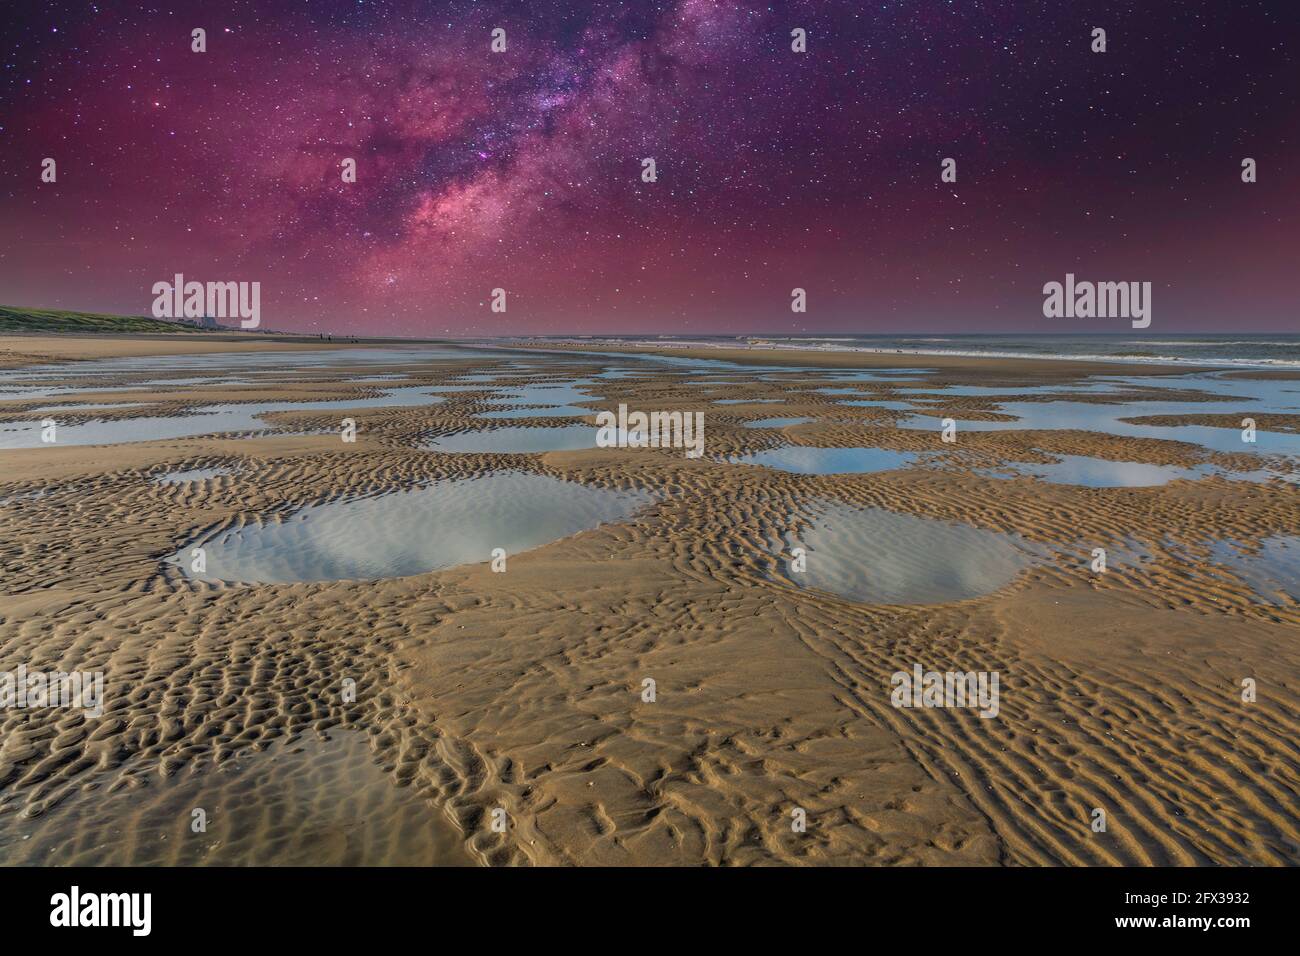 Night scene with clear starry sky over deserted coastal landscape with dunes, sea and beach with lagging saltwater lakes at low tide Stock Photo